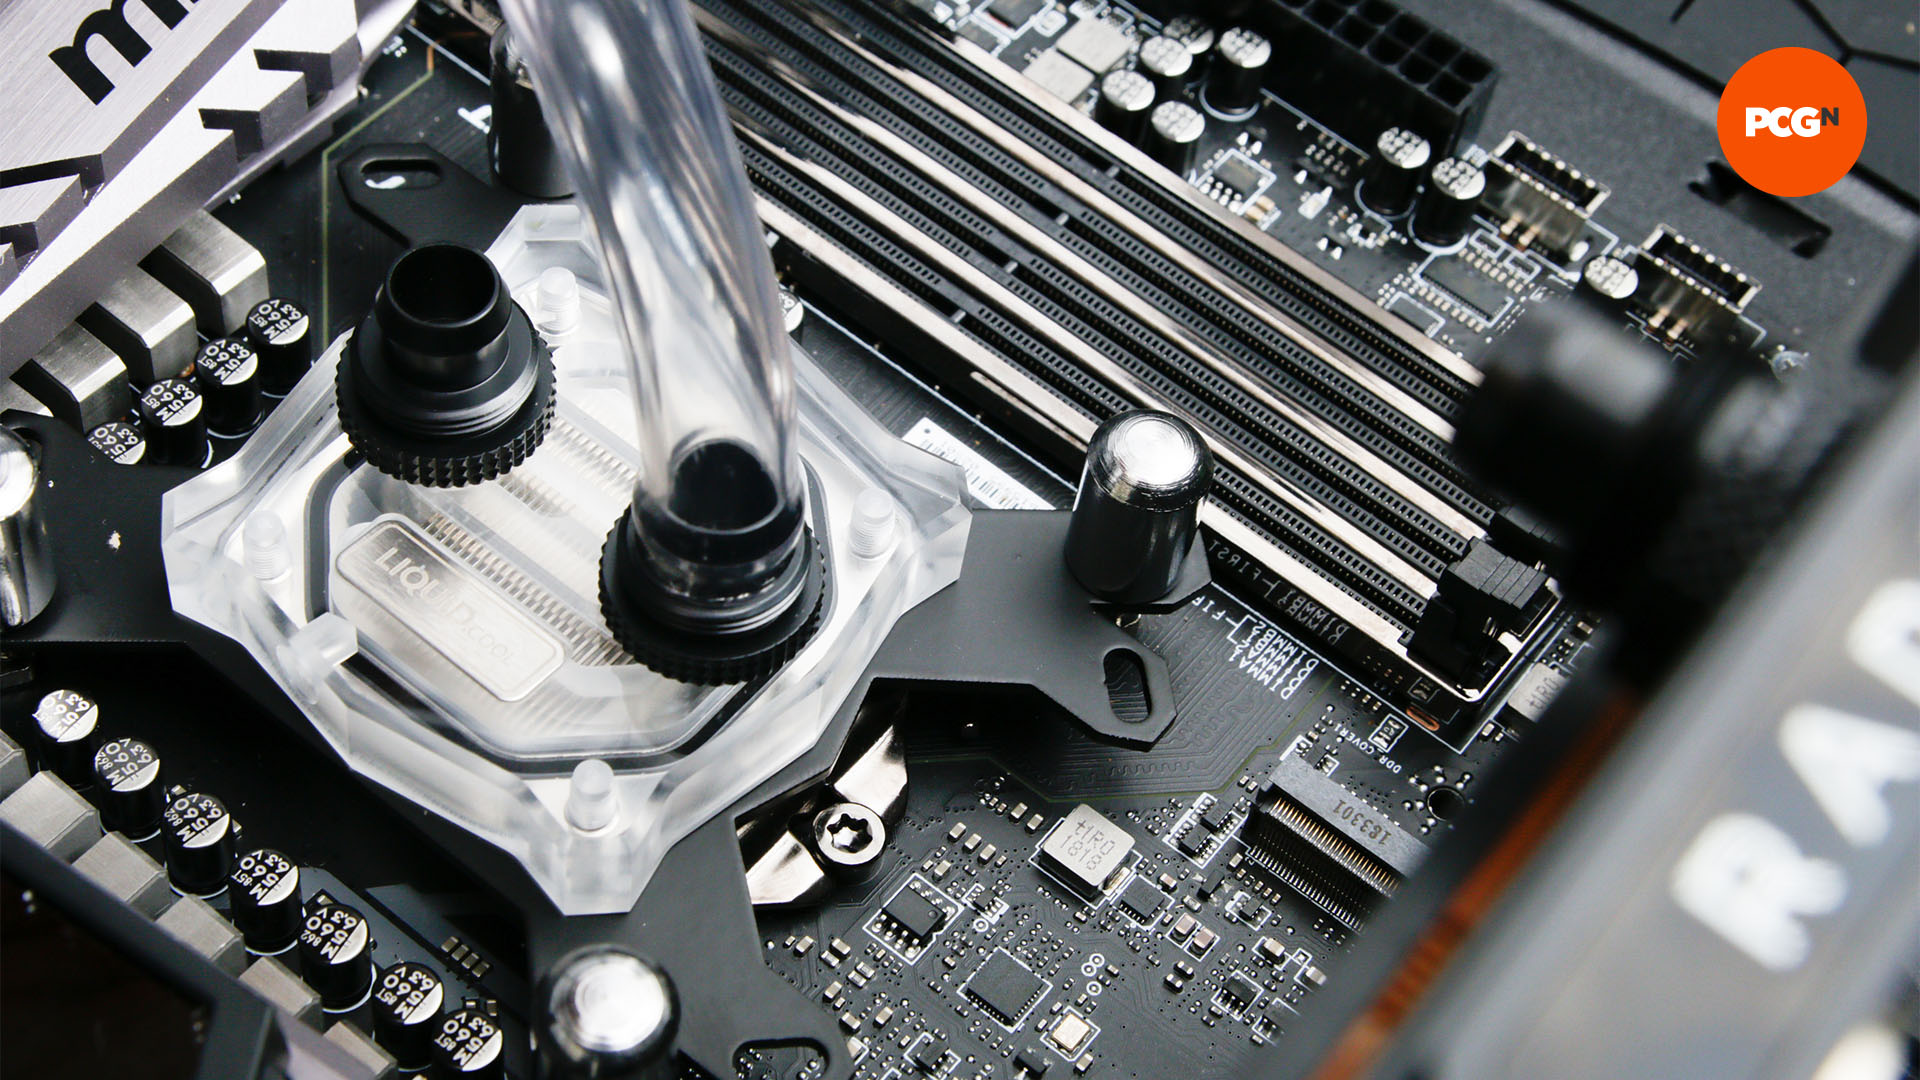 How to water cool your PC: Attach tubing to fitting on CPU waterblock